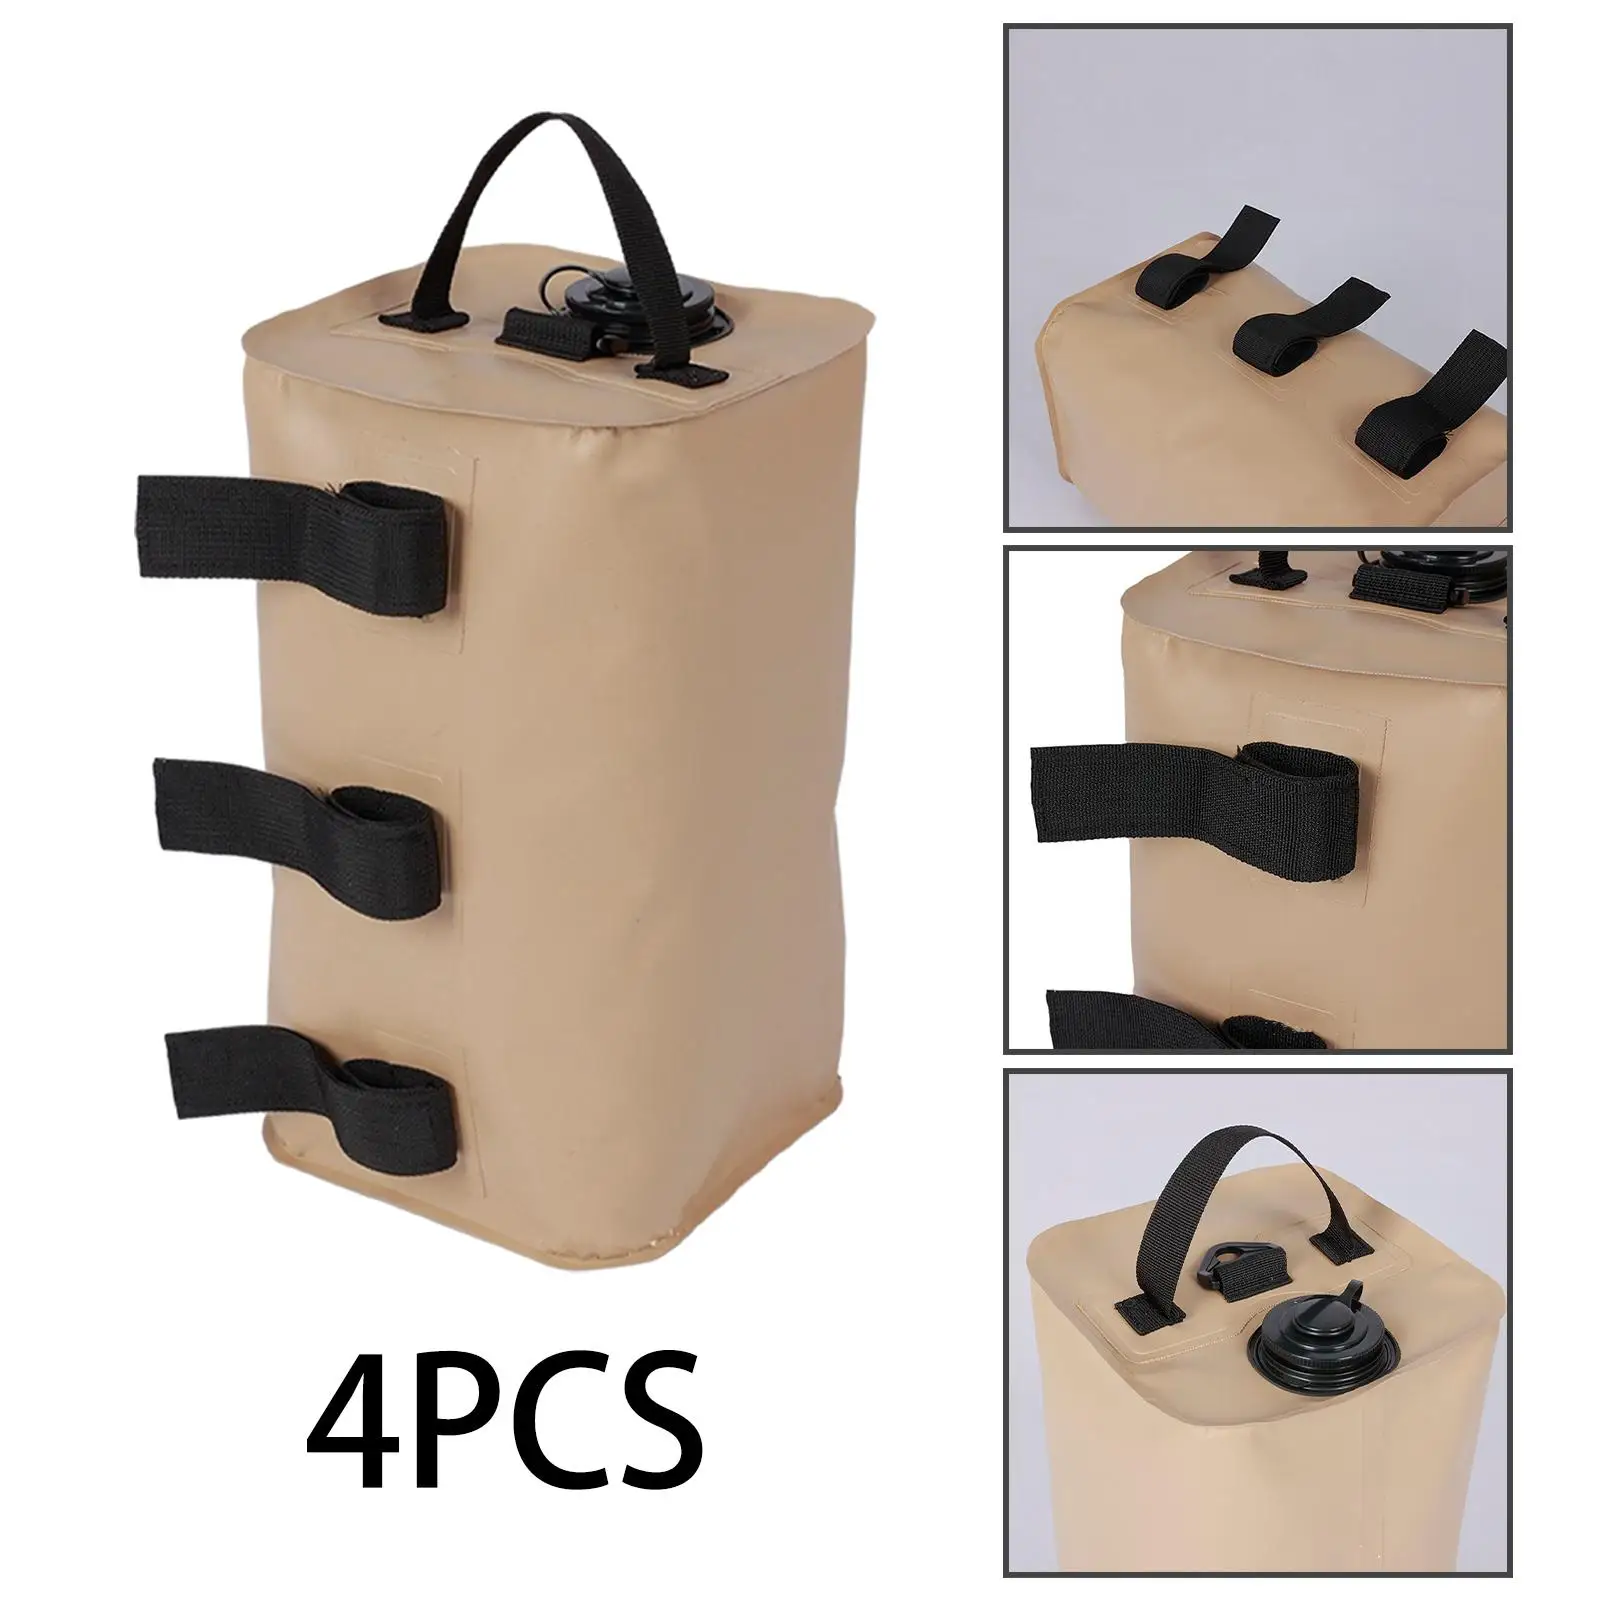 4Pcs Canopy Water Weight Bags, Sand Weights Bags with Pothook without Sand for Beach, Outdoor Furniture, Trampoline